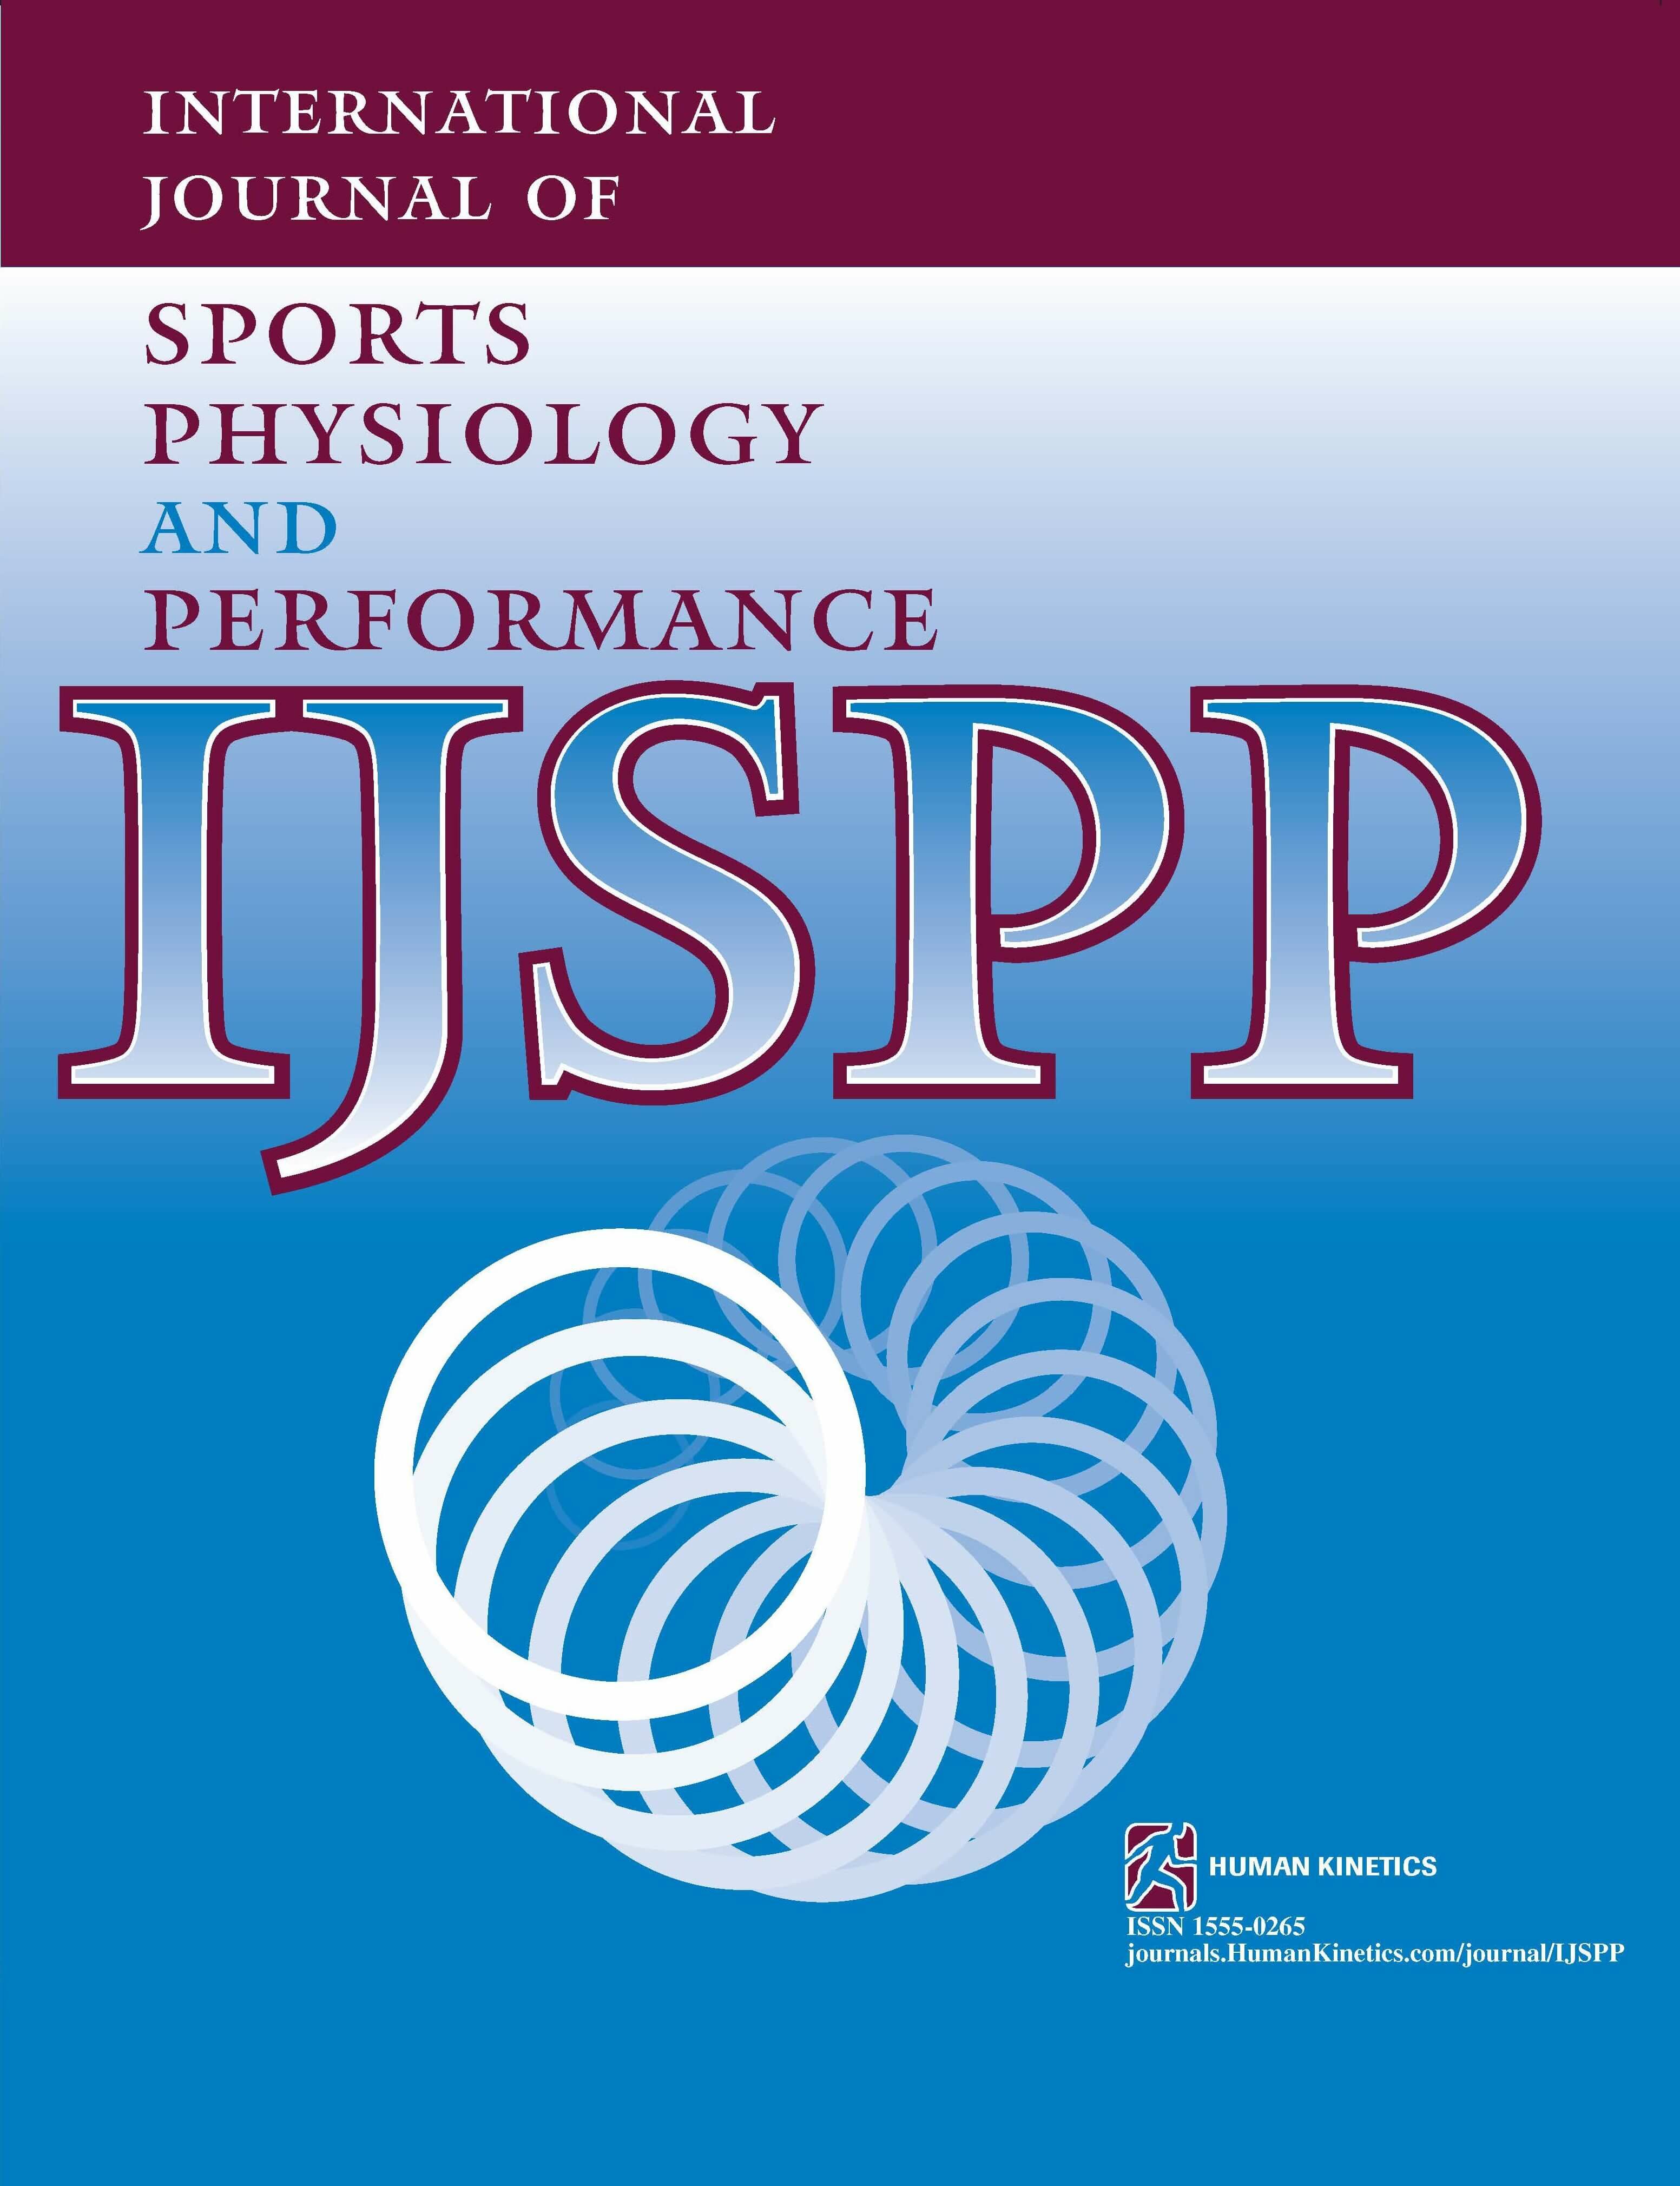 Postactivation Performance Enhancement With Maximal Isometric Contraction on Power-Clean Performance Across Multiple Sets